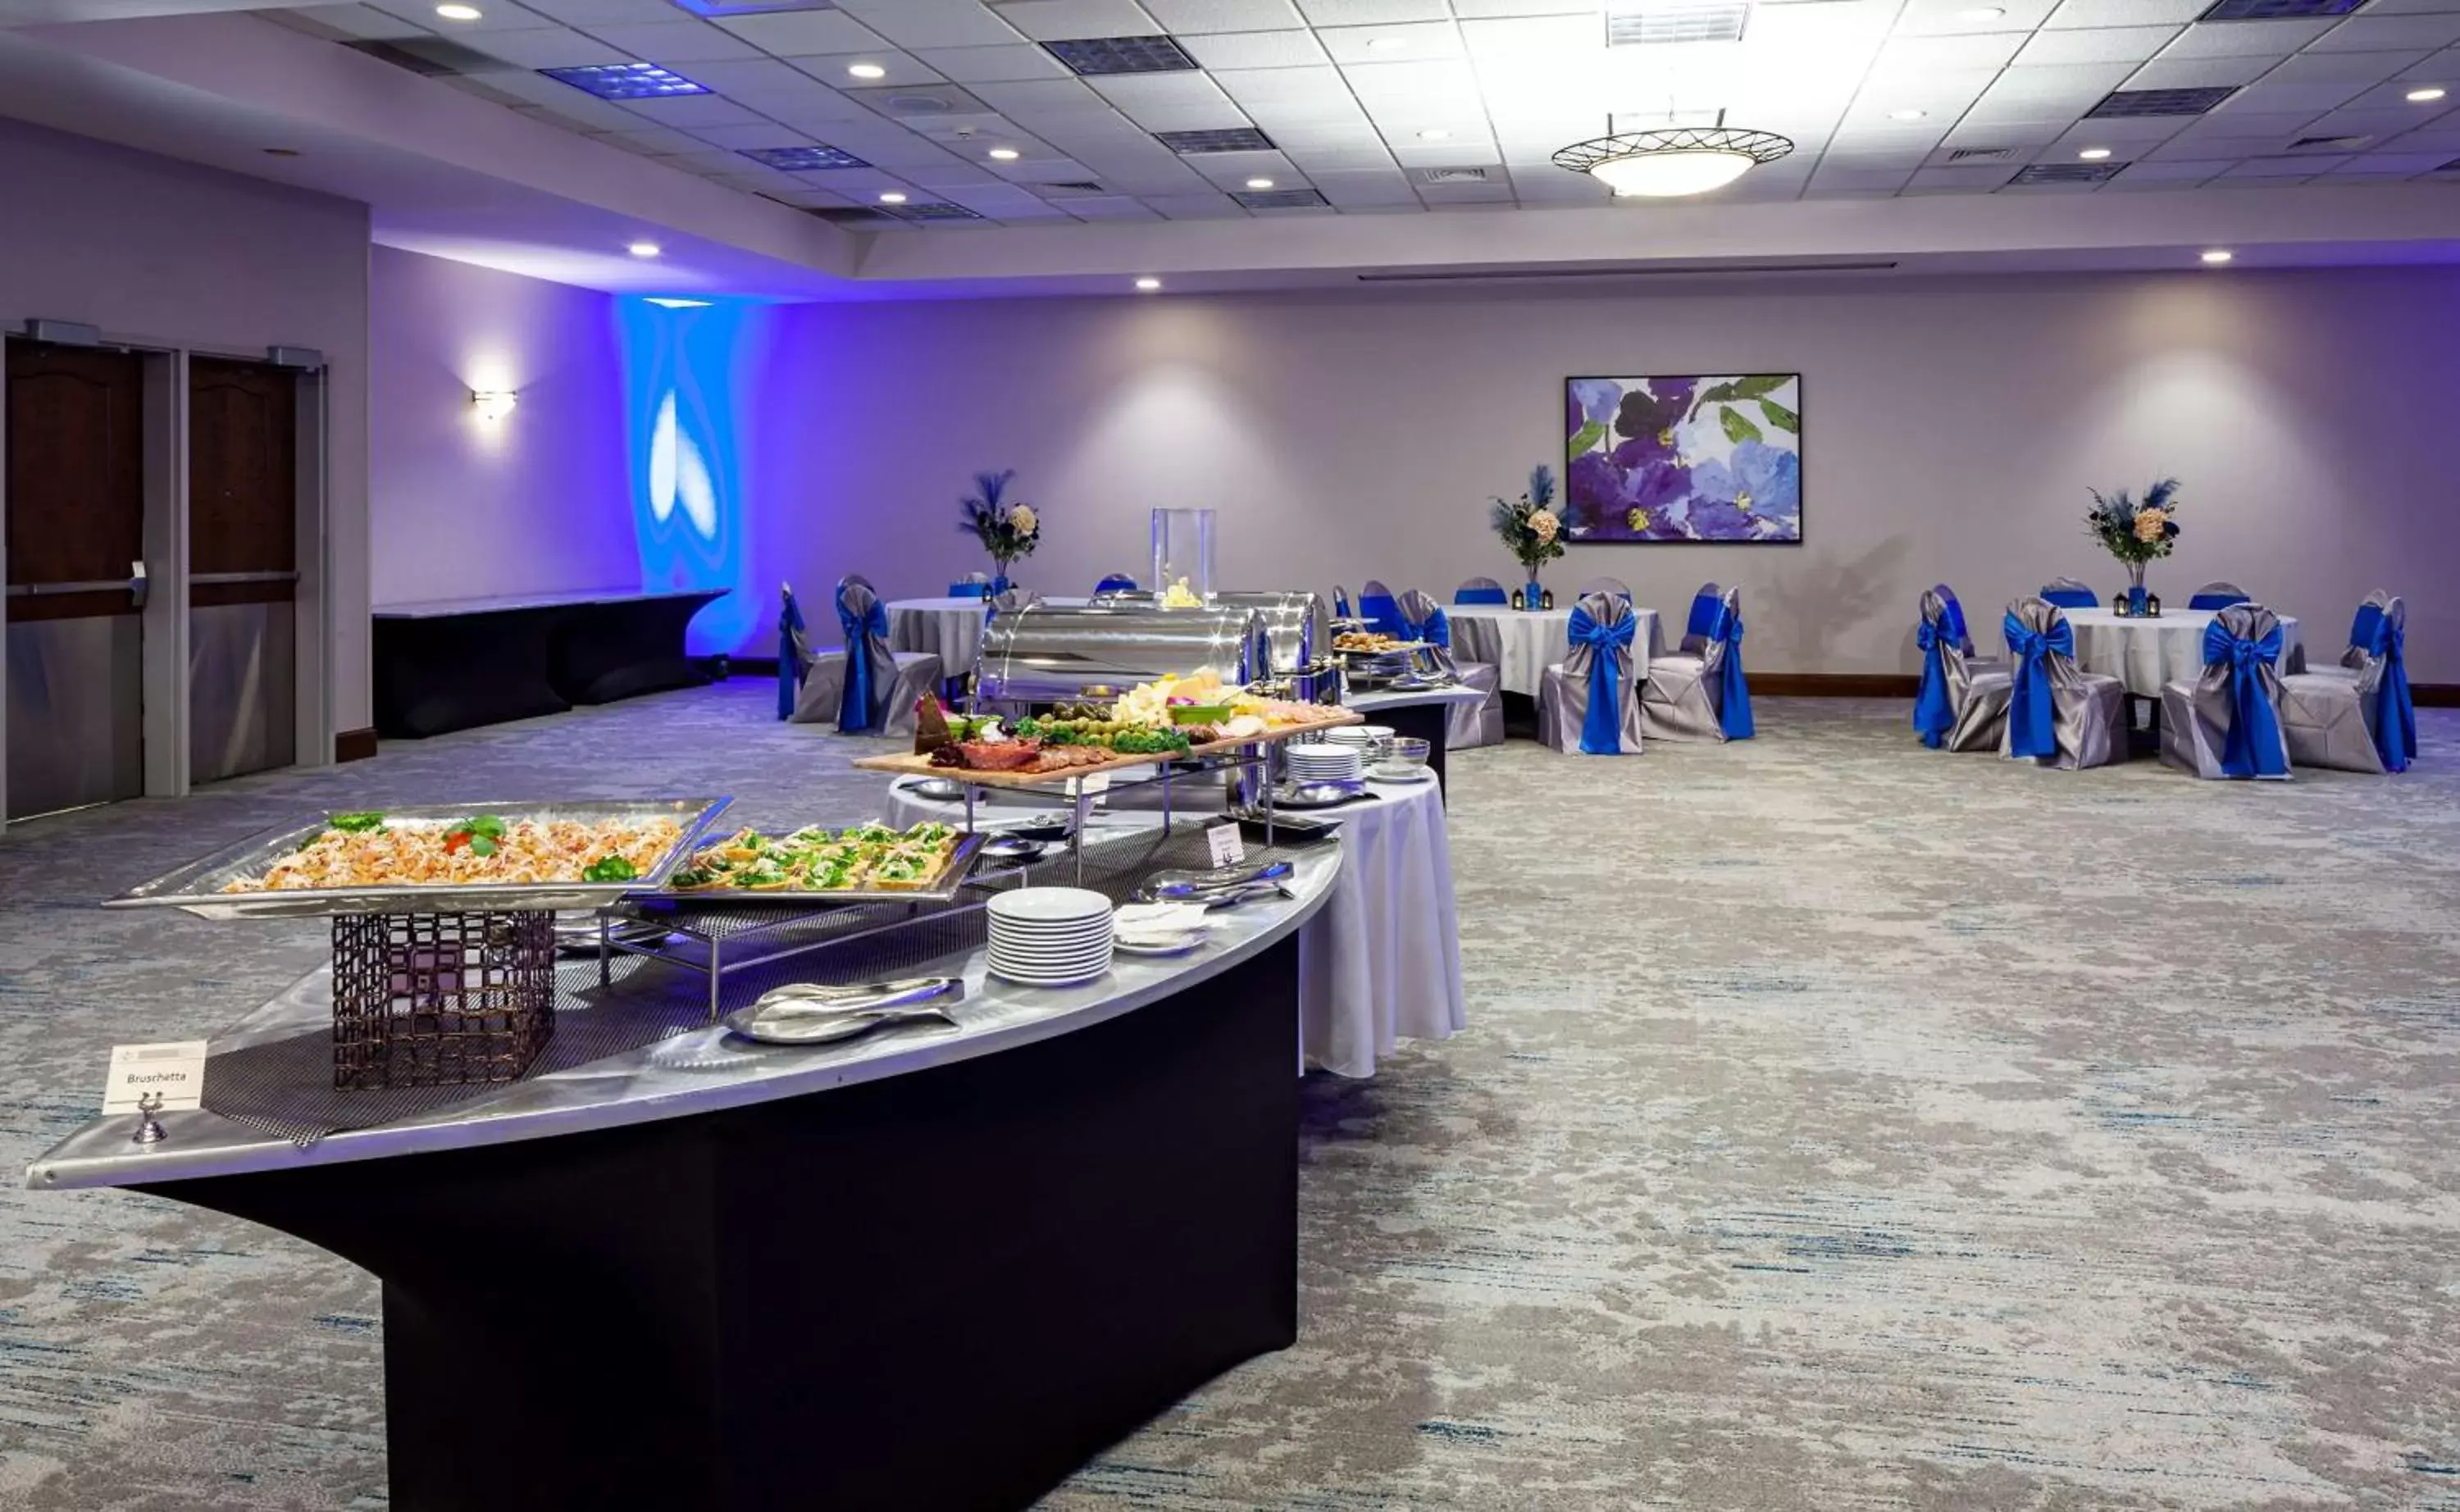 Meeting/conference room, Banquet Facilities in Hilton Garden Inn Chicago O'Hare Airport